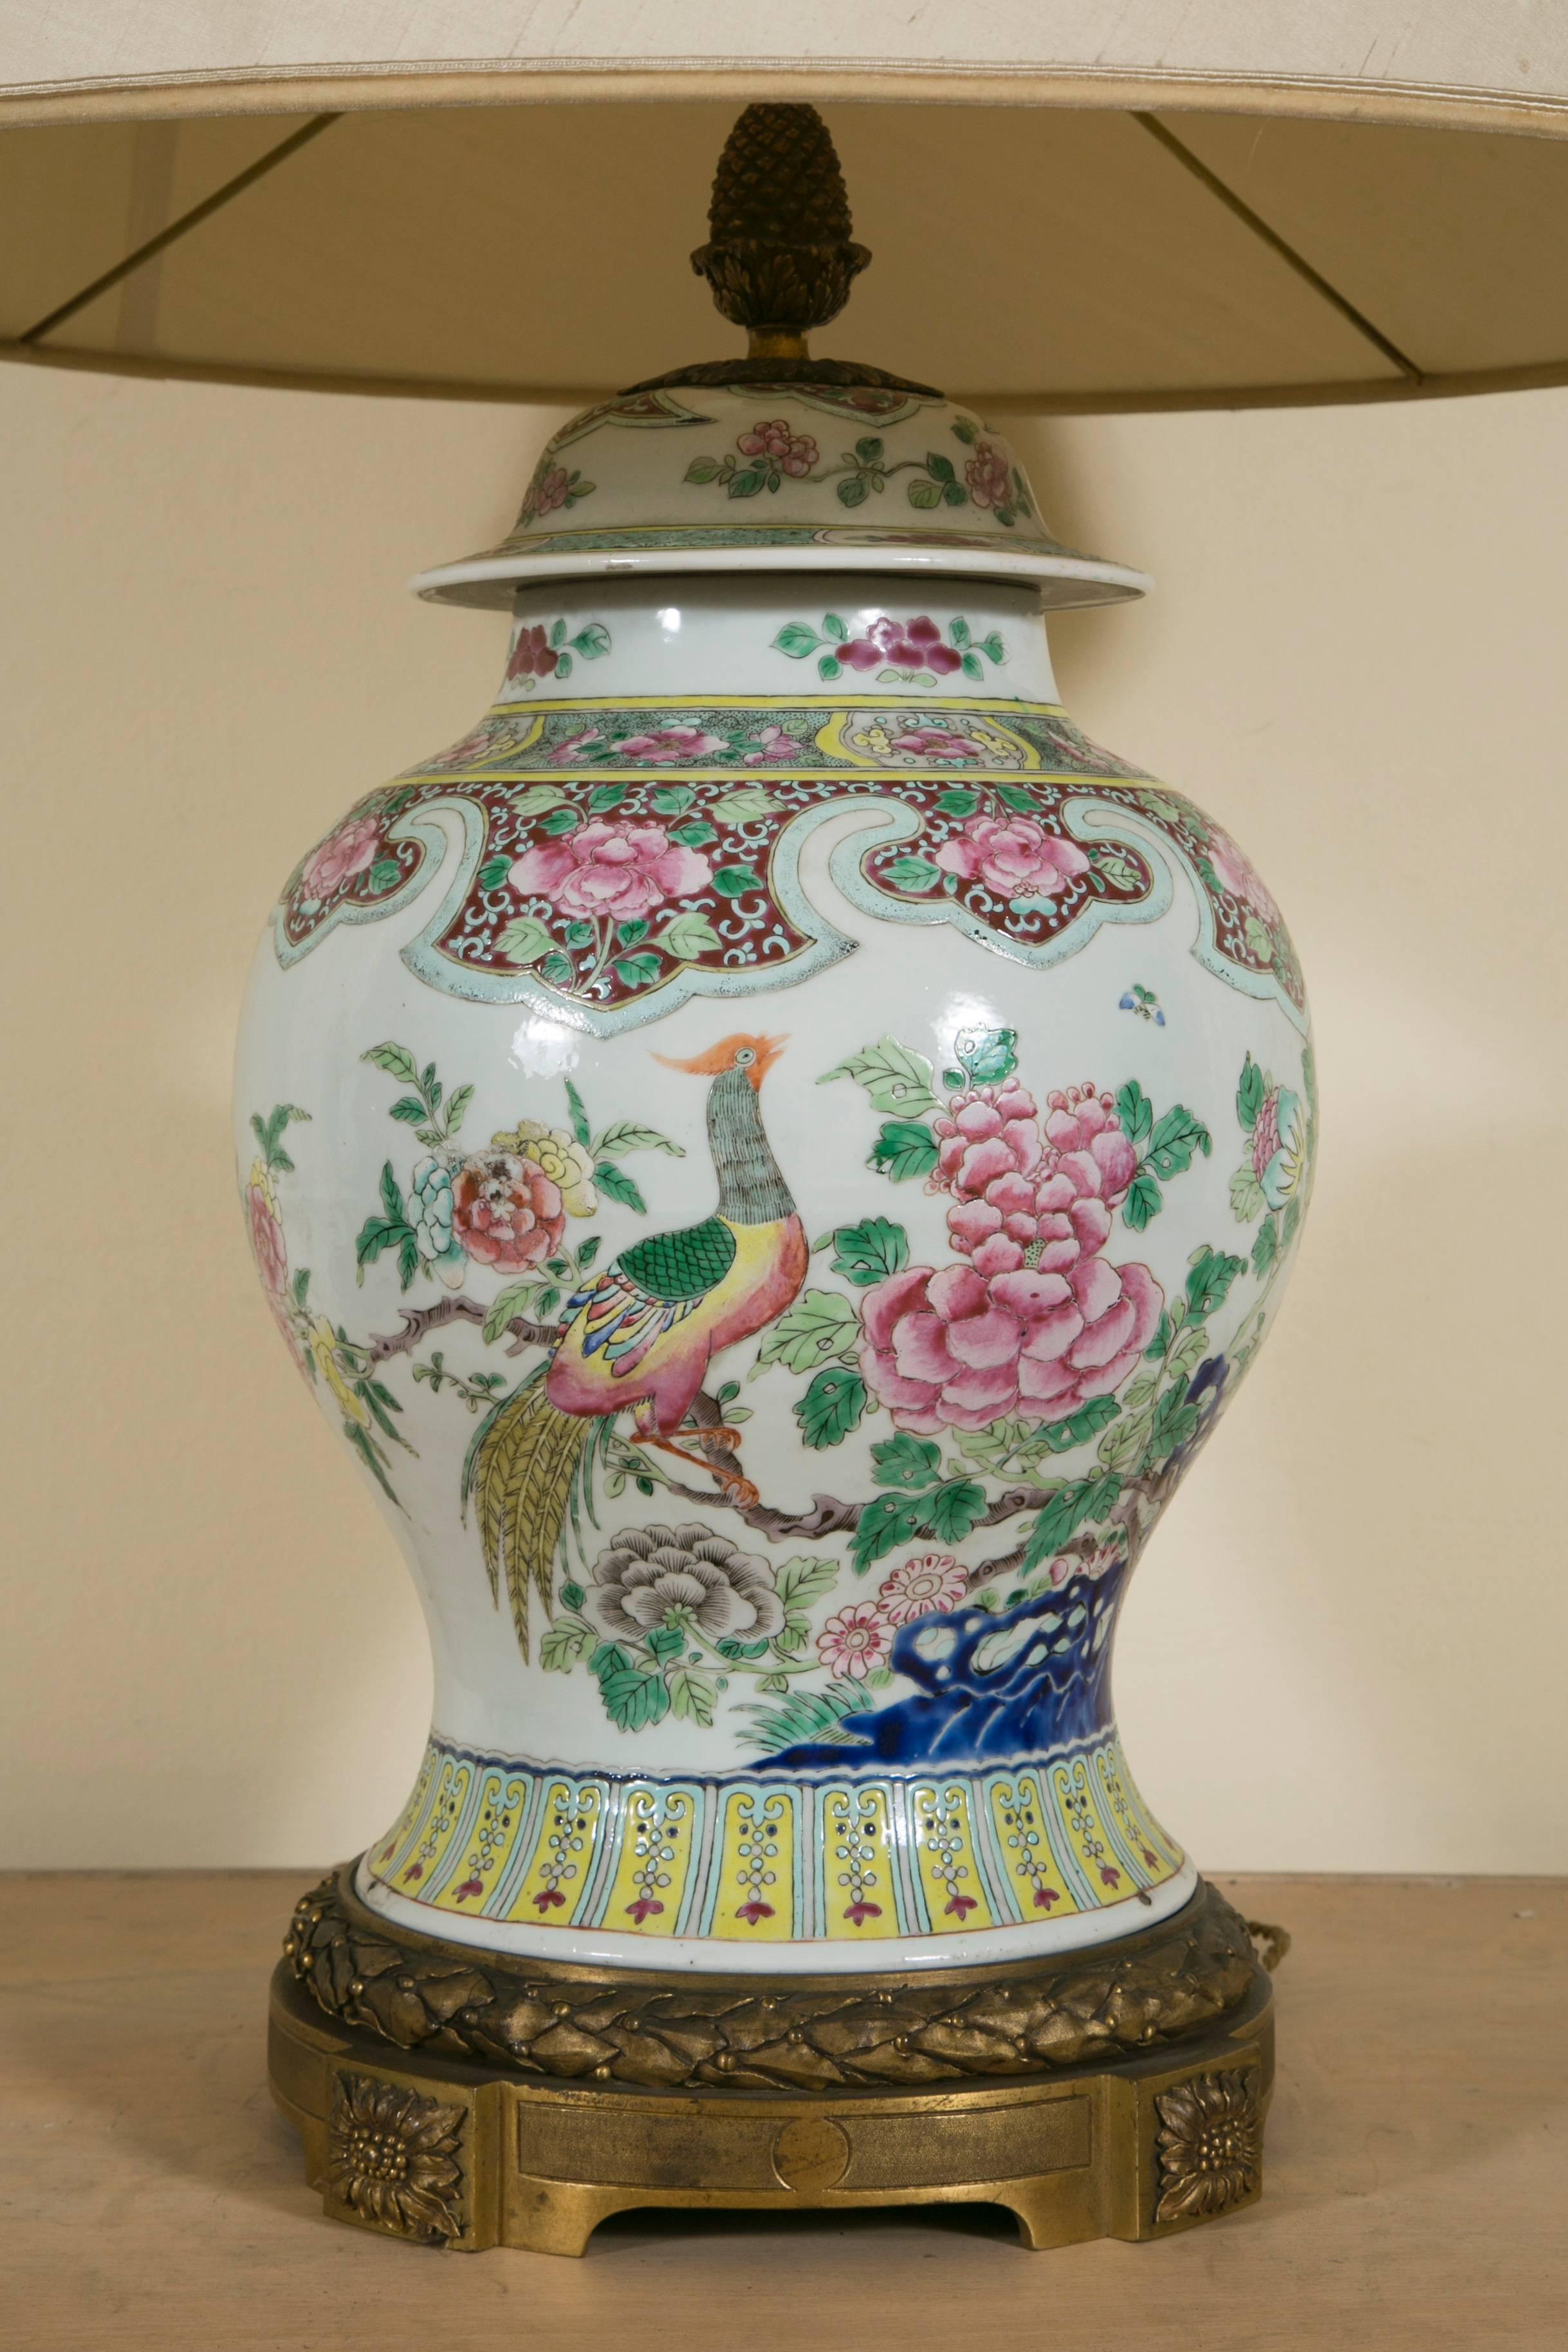 Polycromed Chinese jar with its cover on a LXVI gilt bronze base and pine finial made as lamp base.

Wired to the EU standard
sizes with shade, height 88cm diameter 56cm.
Worn fabric lamp shade available free.